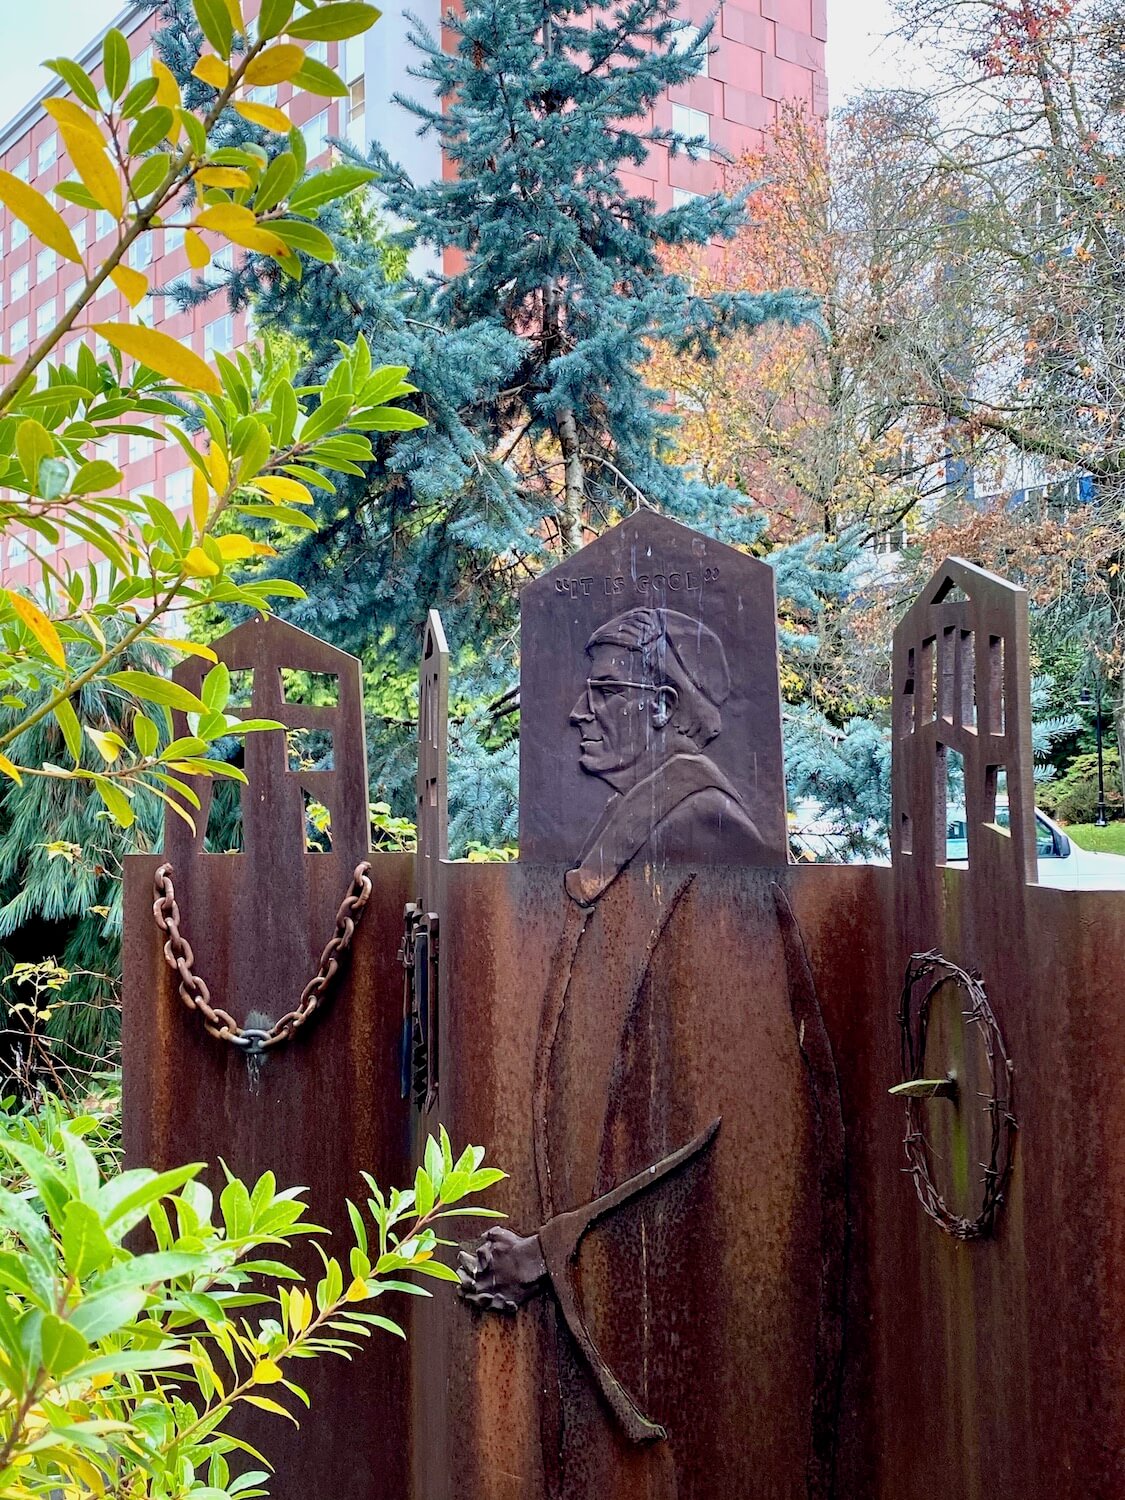 A rusted bronze art installment on the campus of Seattle University depicts a priest amongst other symbolic chunks of chain and barbed wire, making a political statement.  In the background are trees with multi-colored leaves.